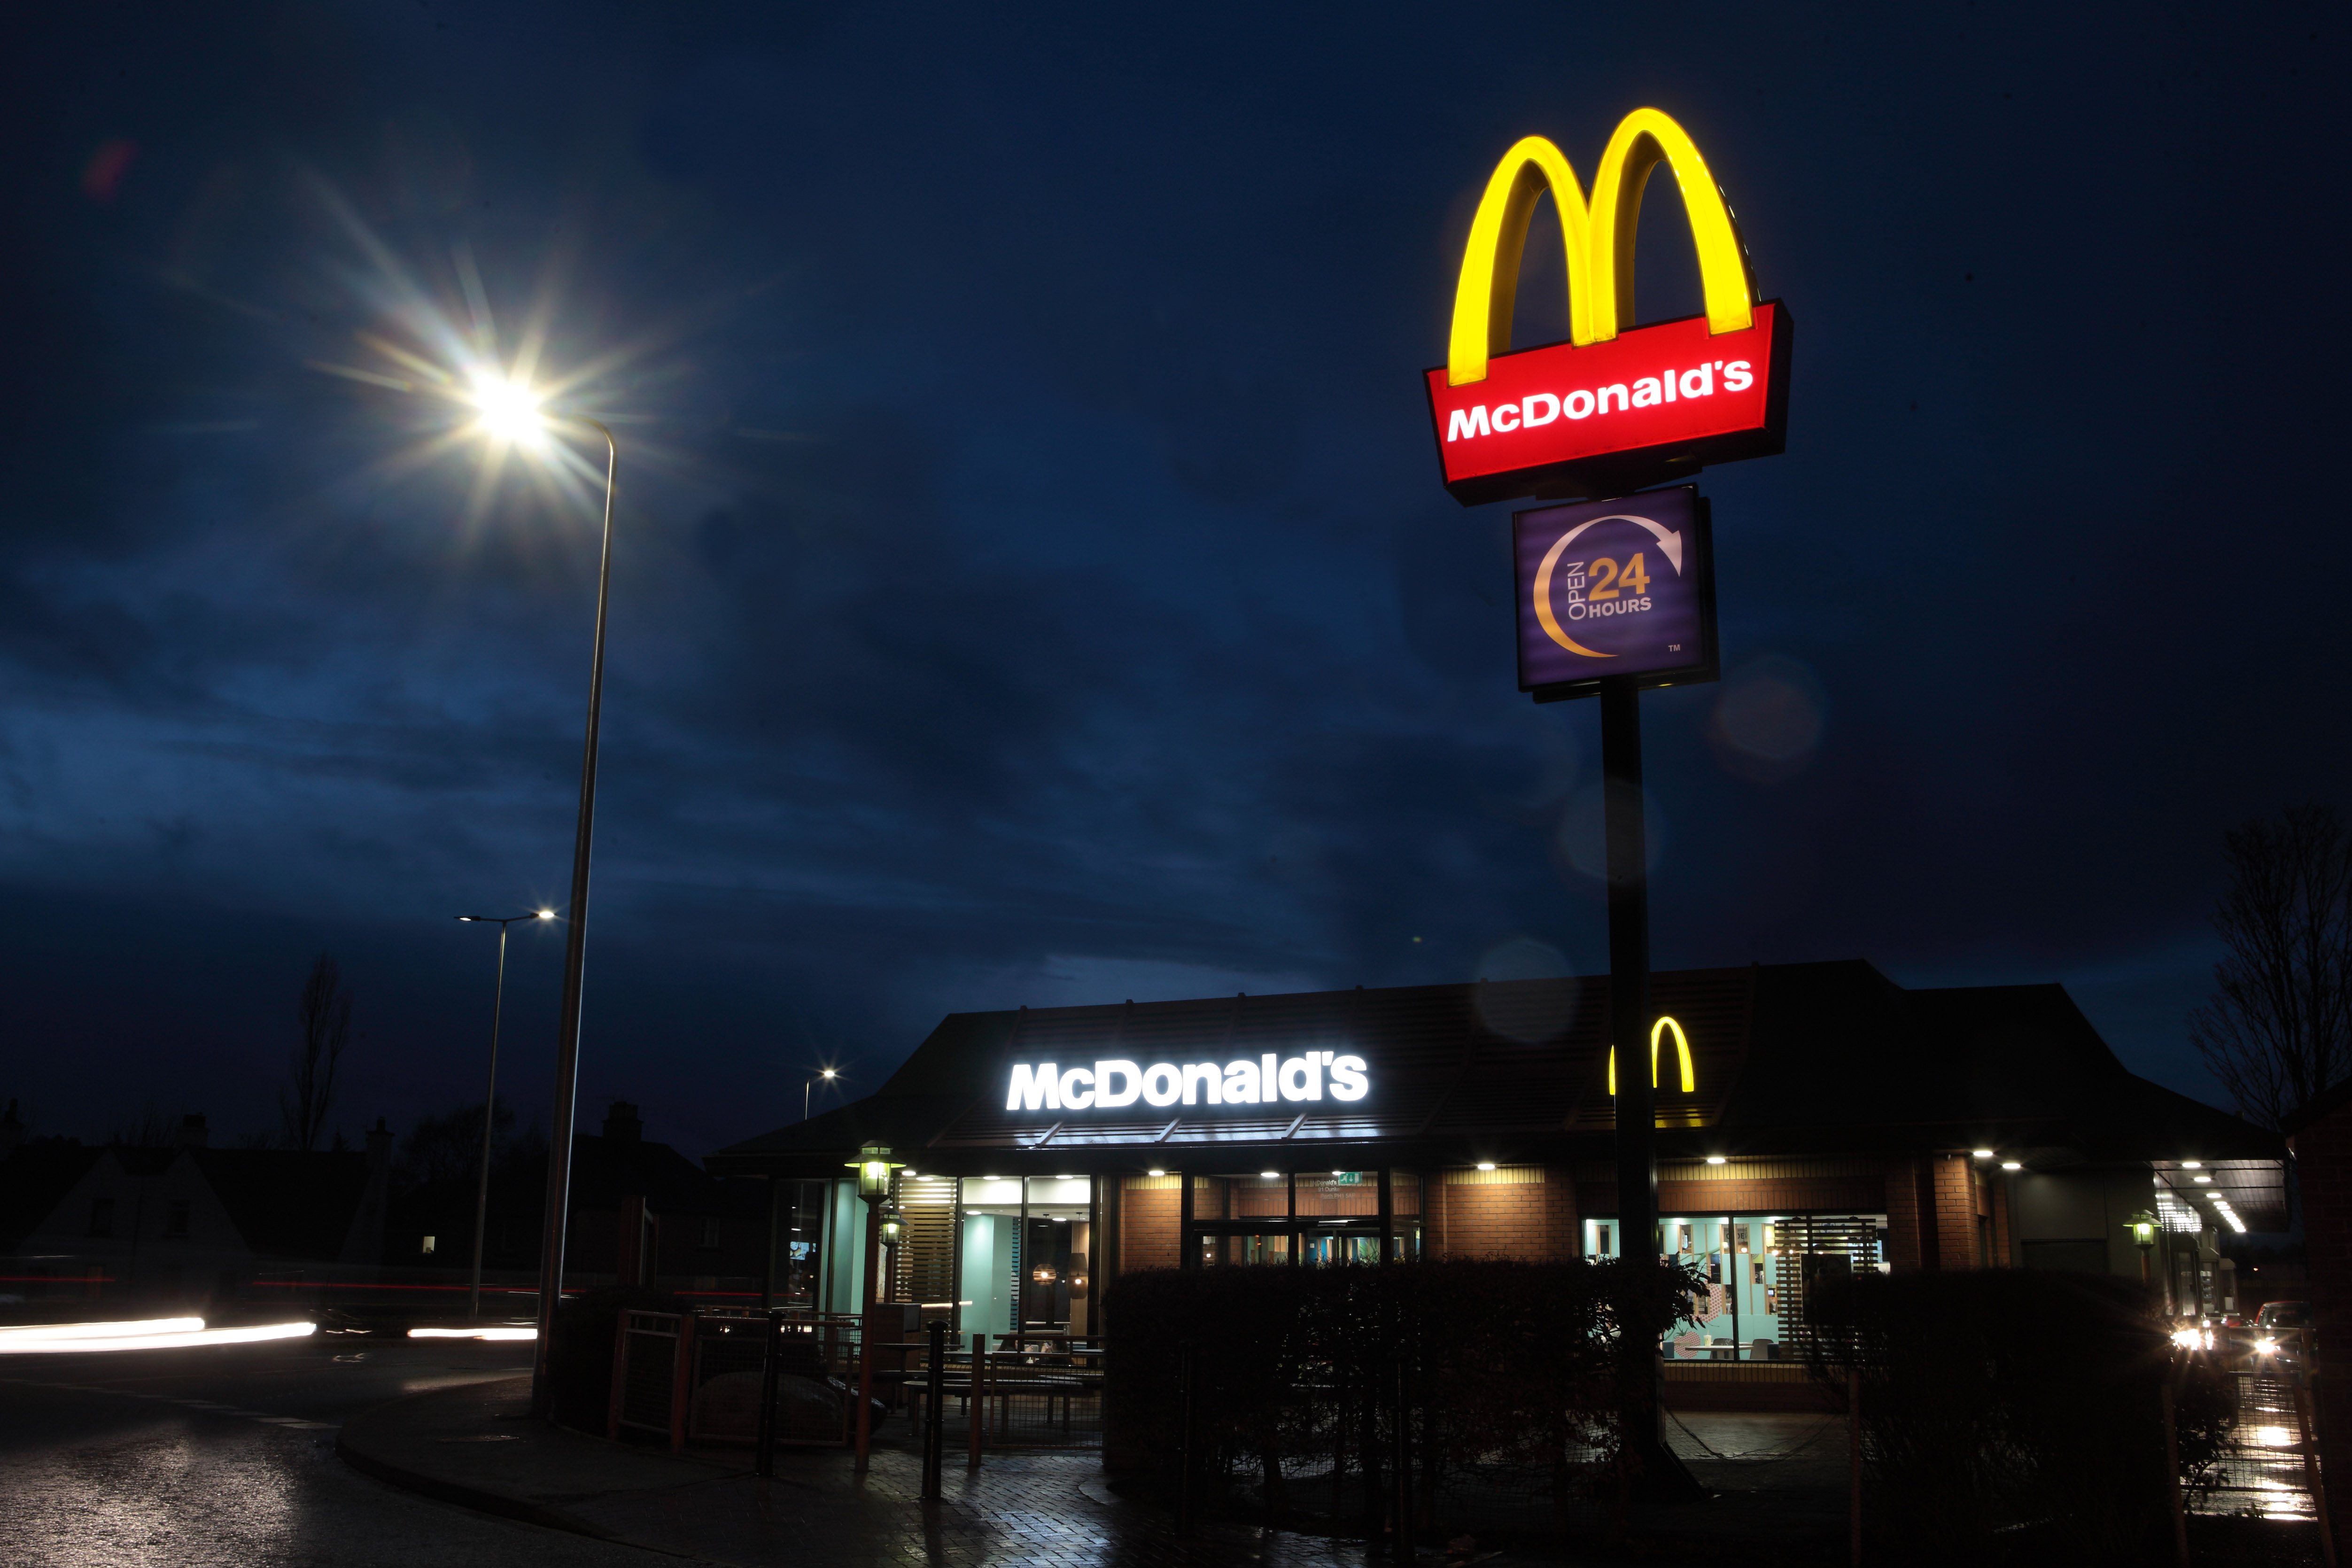 McDonald's have taken steps to improve their relationship with the community at their Dunkeld Road branch